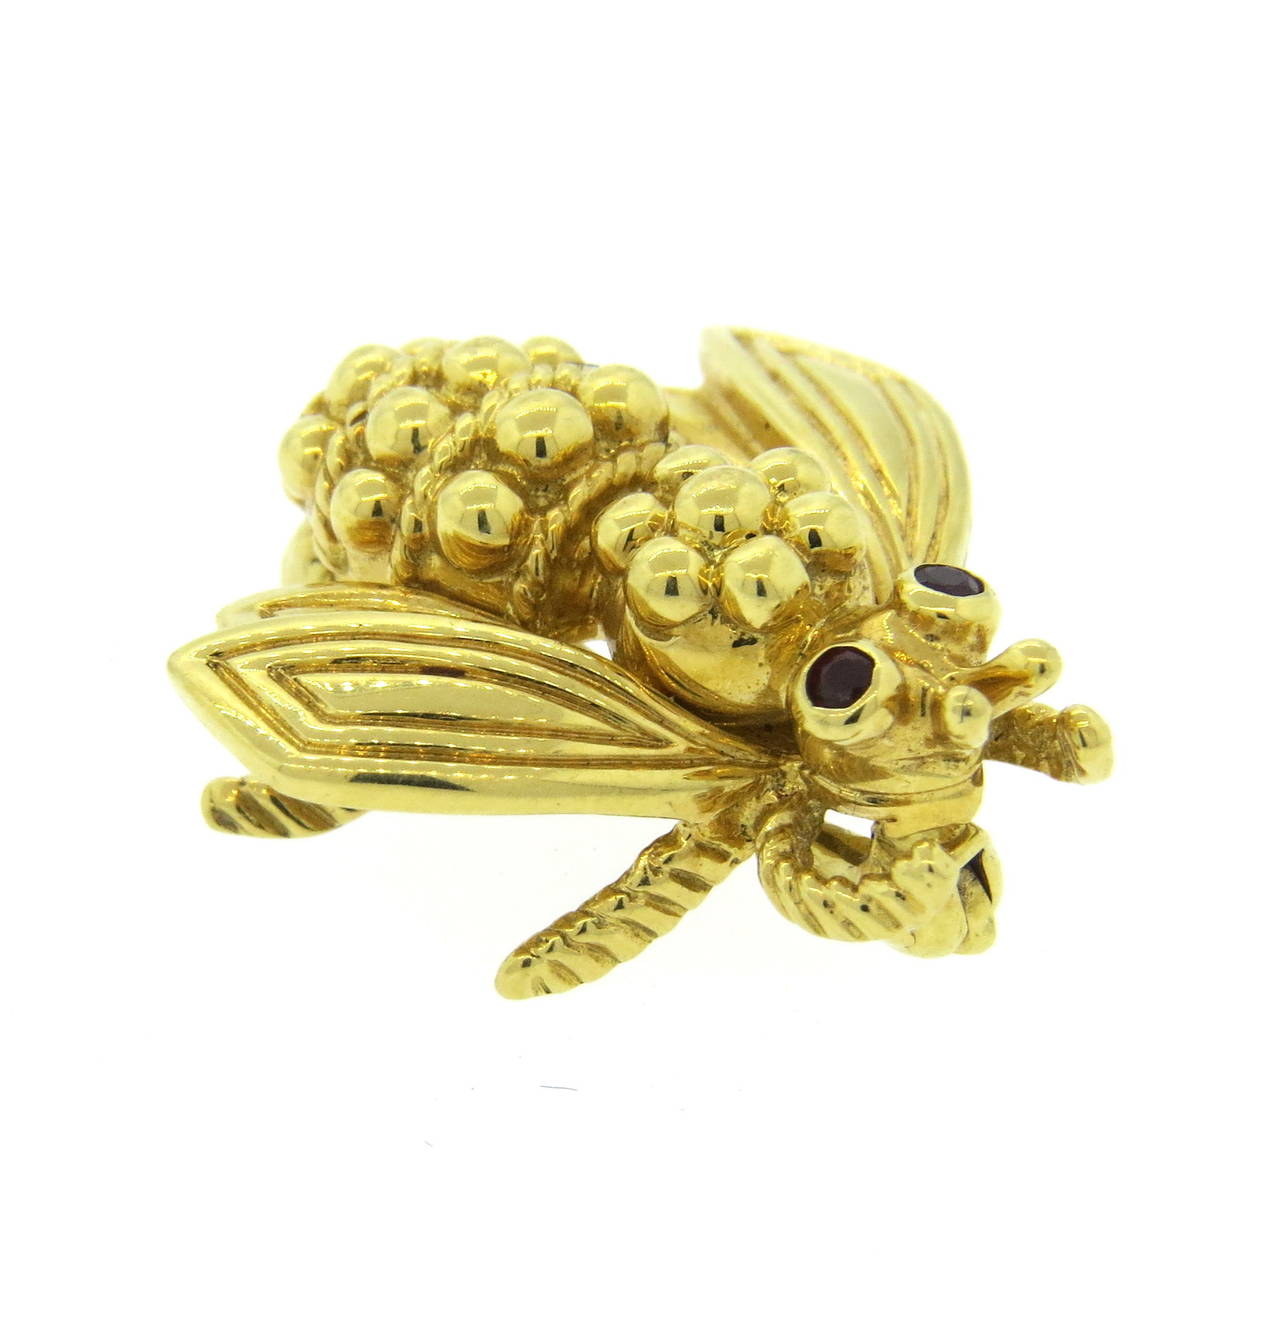 18k gold bee brooch with ruby eyes, measuring 20mm x 20mm. Marked Tiffany & Co,750. weight - 5.1gr